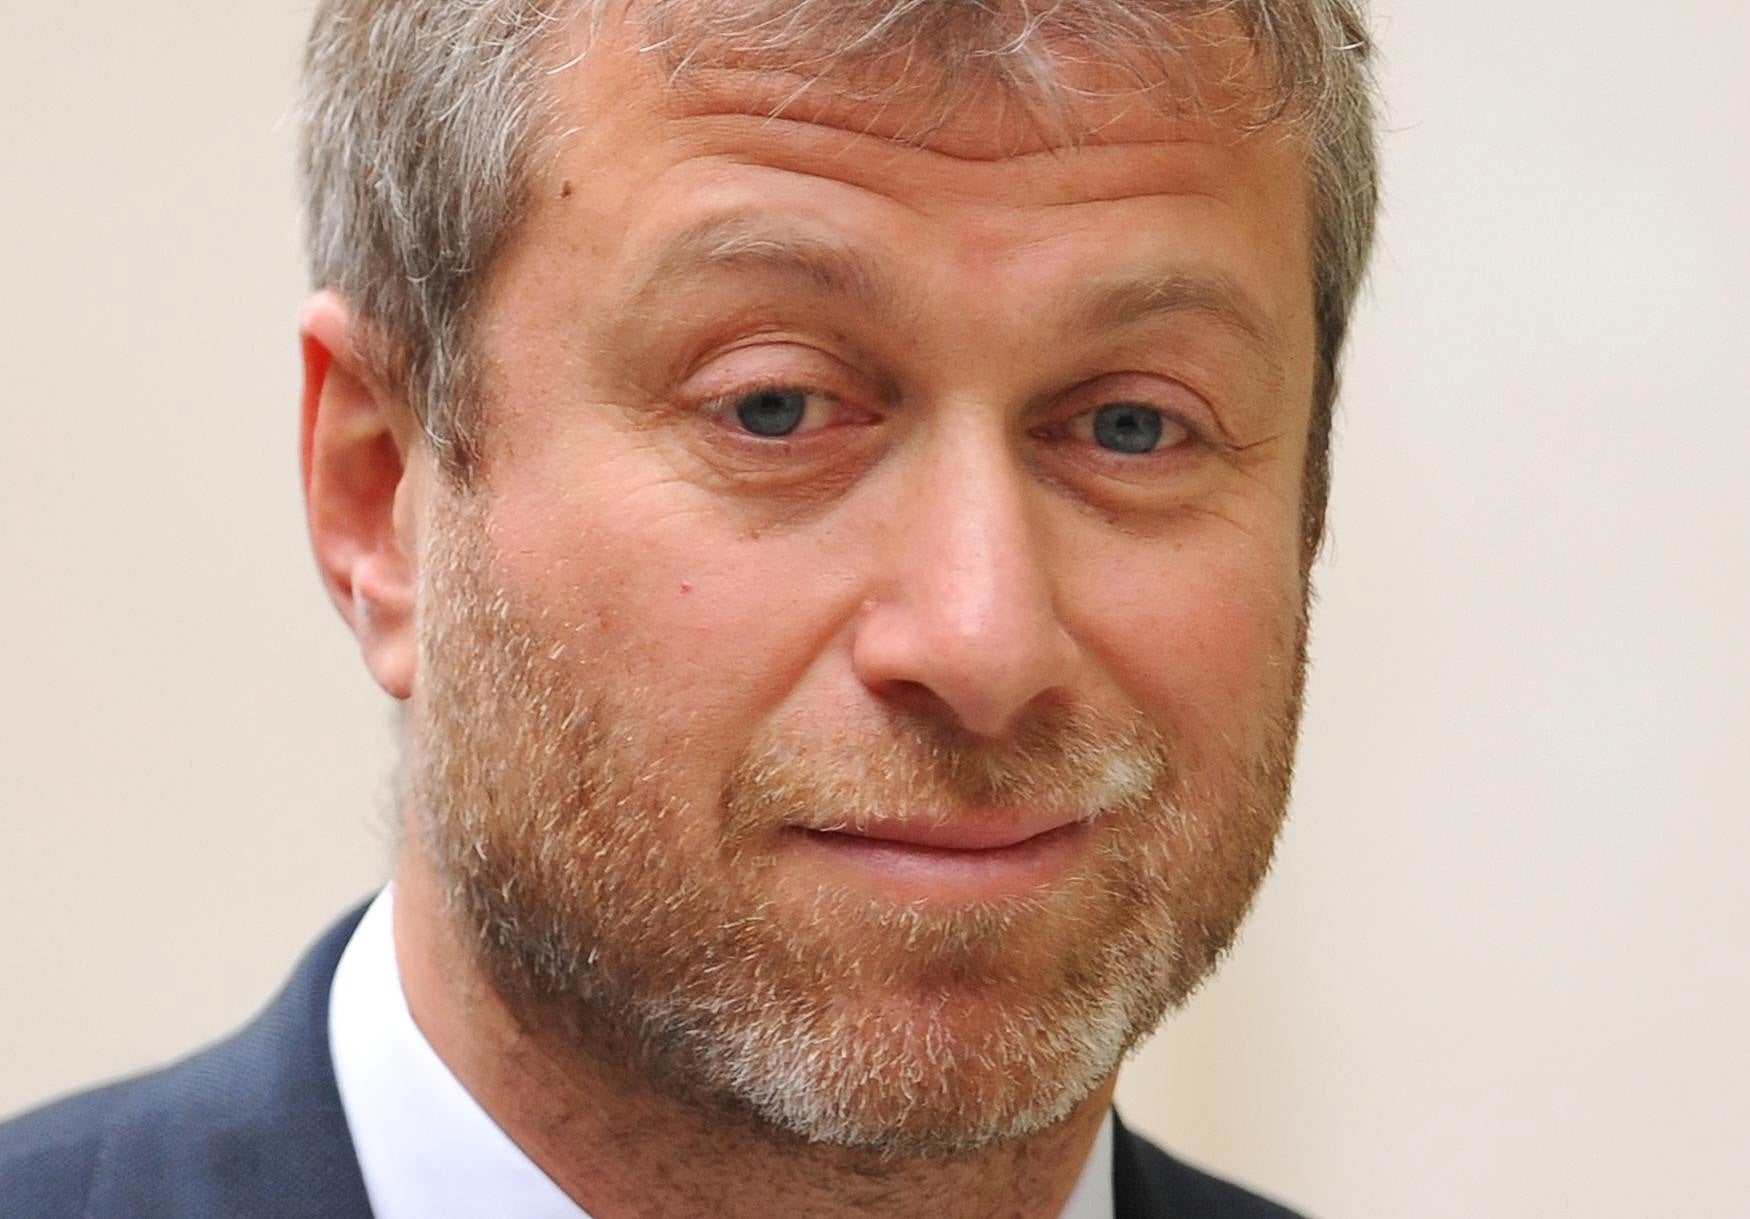 Roman Abramovich was sanctioned by Britain on 10 March 2022